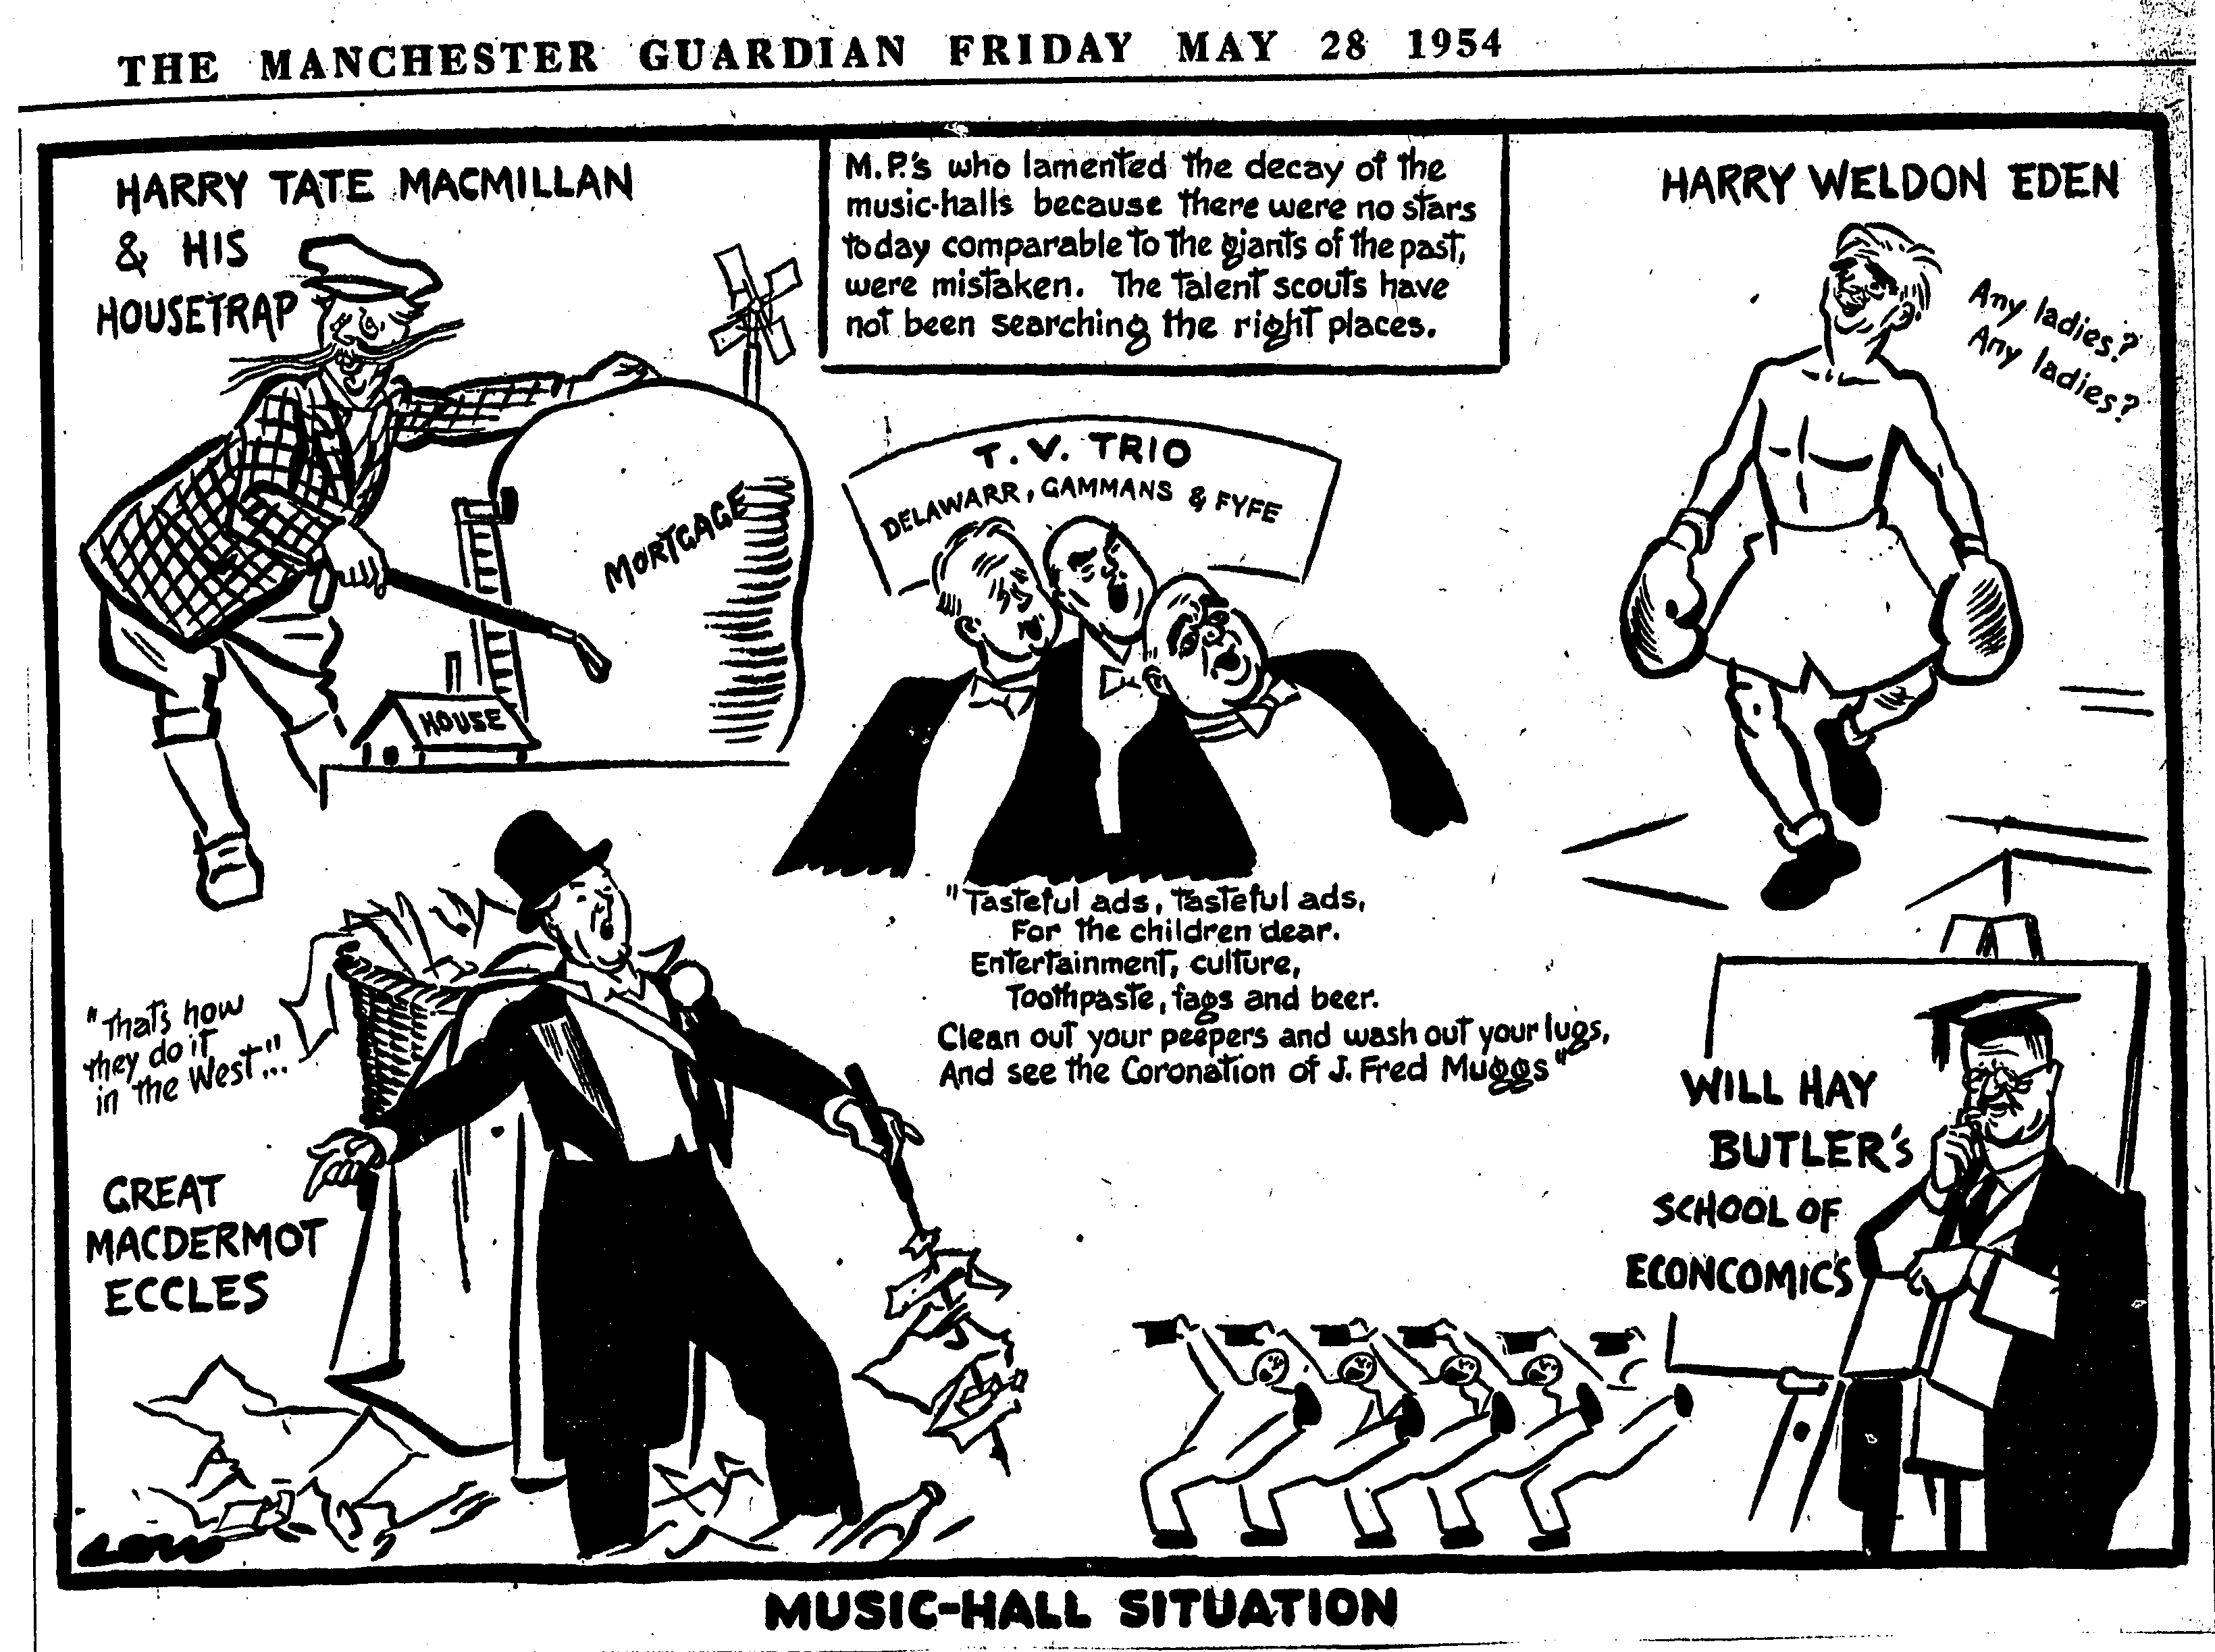 Cartoon by David Low comparing the current political situation to a night of music hall entertainment